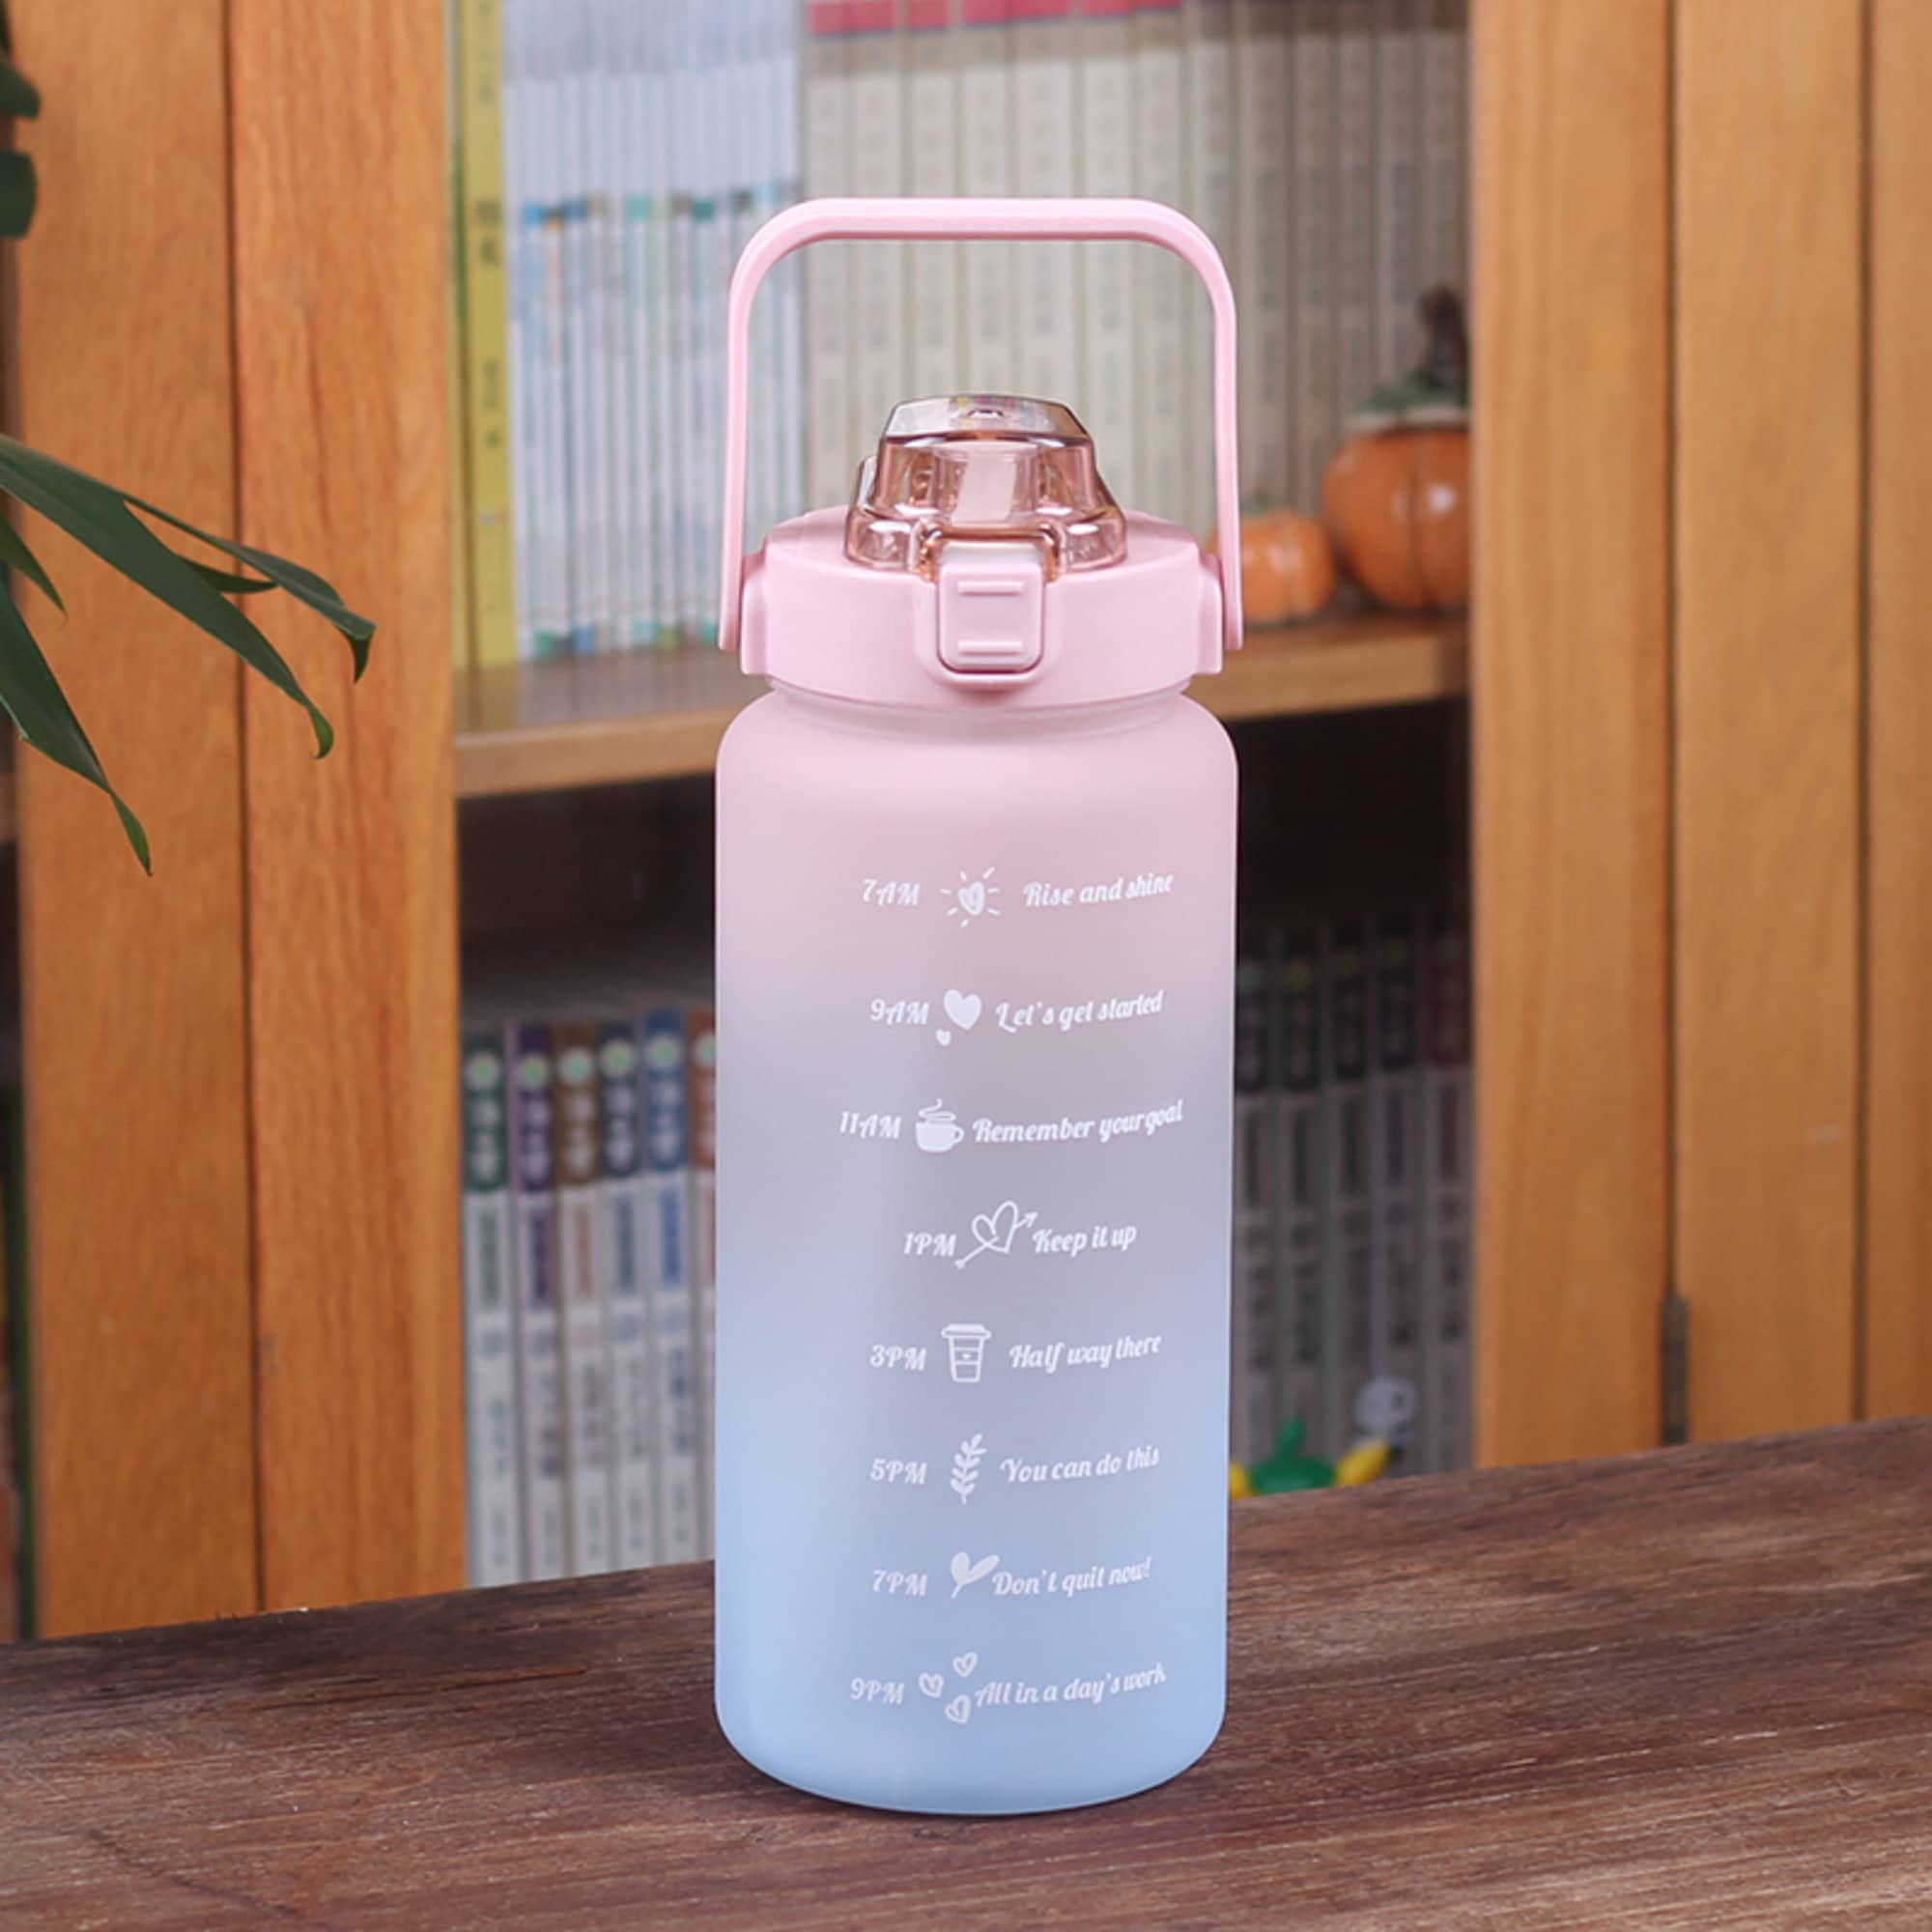 2L Leak-Proof BPA-Free Sport Motivational 3 in 1 Fitness Water Bottle Set -  China 3 in 1 Water Bottle and Water Bottle price